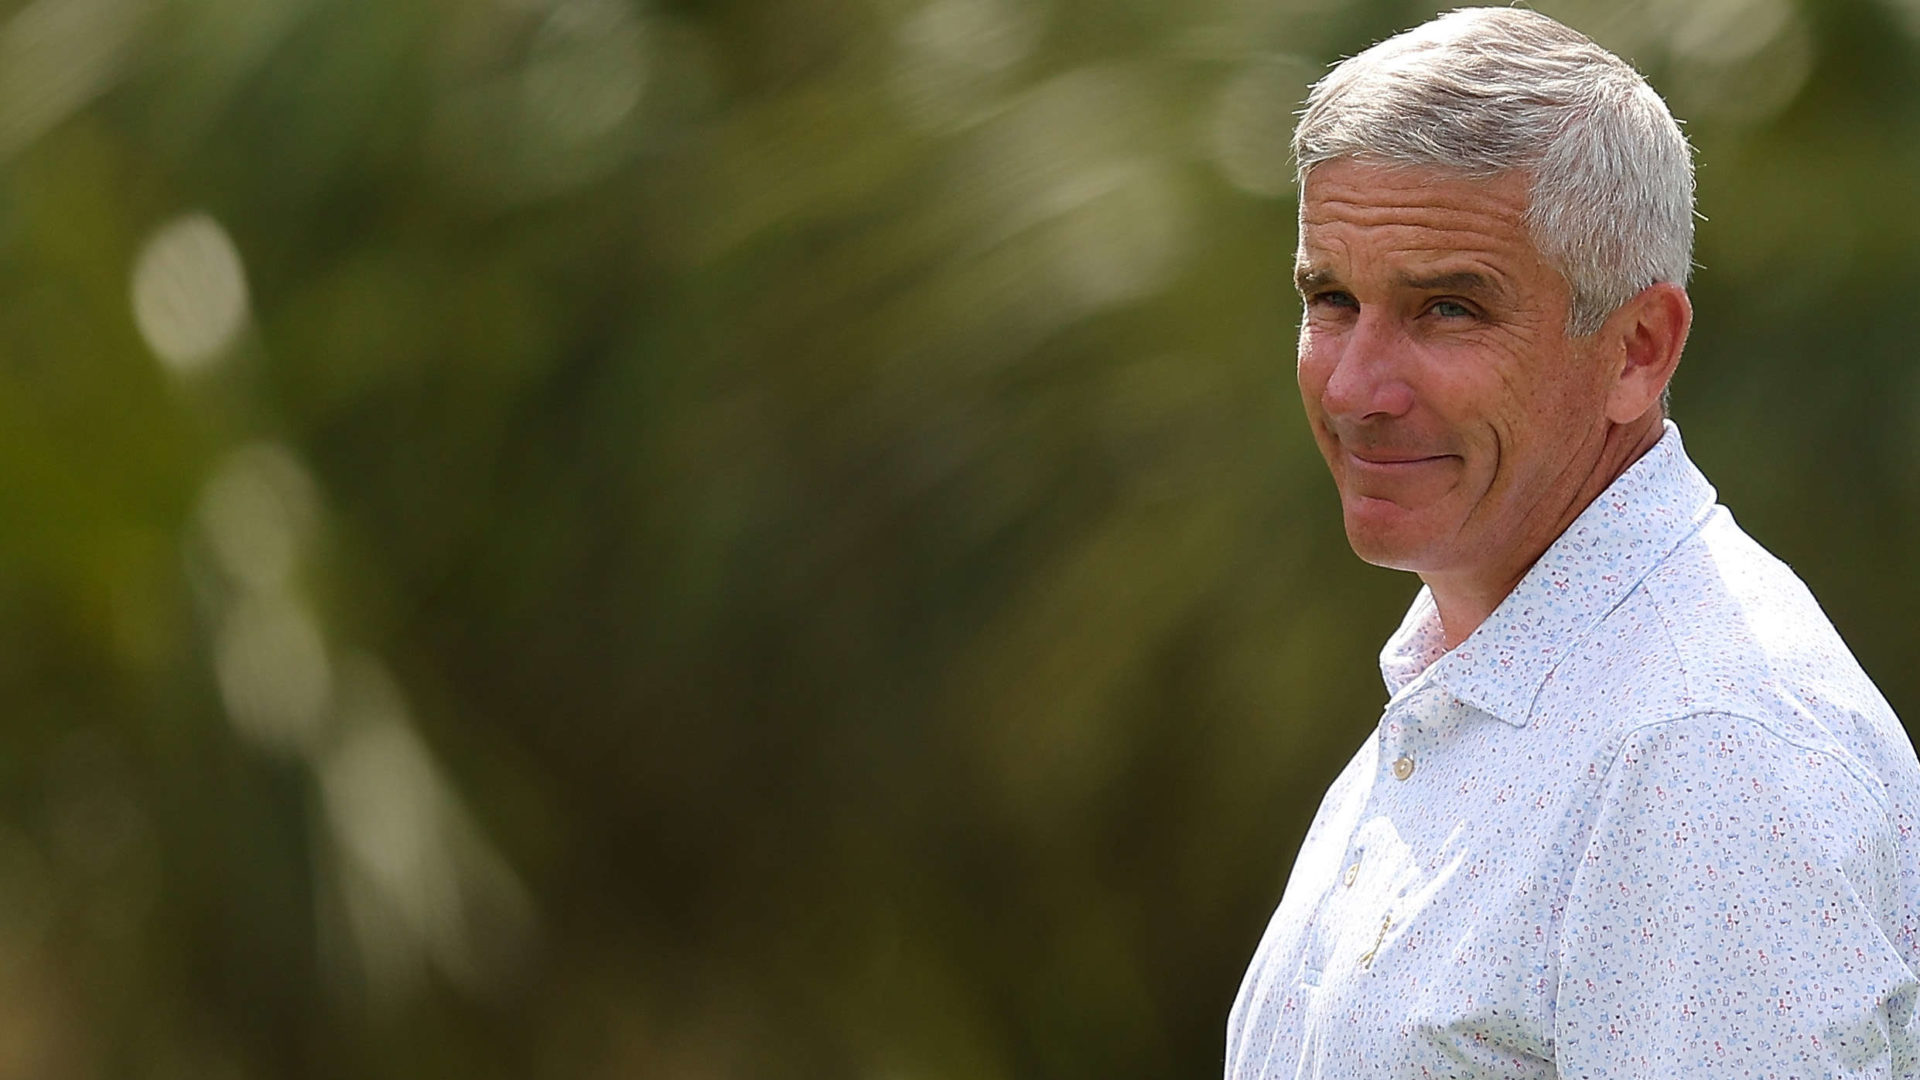 HILTON HEAD ISLAND, SOUTH CAROLINA - APRIL 13: PGA TOUR Commissioner Jay Monahan walks the sixth green during a pro-am prior to the RBC Heritage at Harbor Town Golf Links on April 13, 2022 in Hilton Head Island, South Carolina. (Photo by Kevin C. Cox/Getty Images)